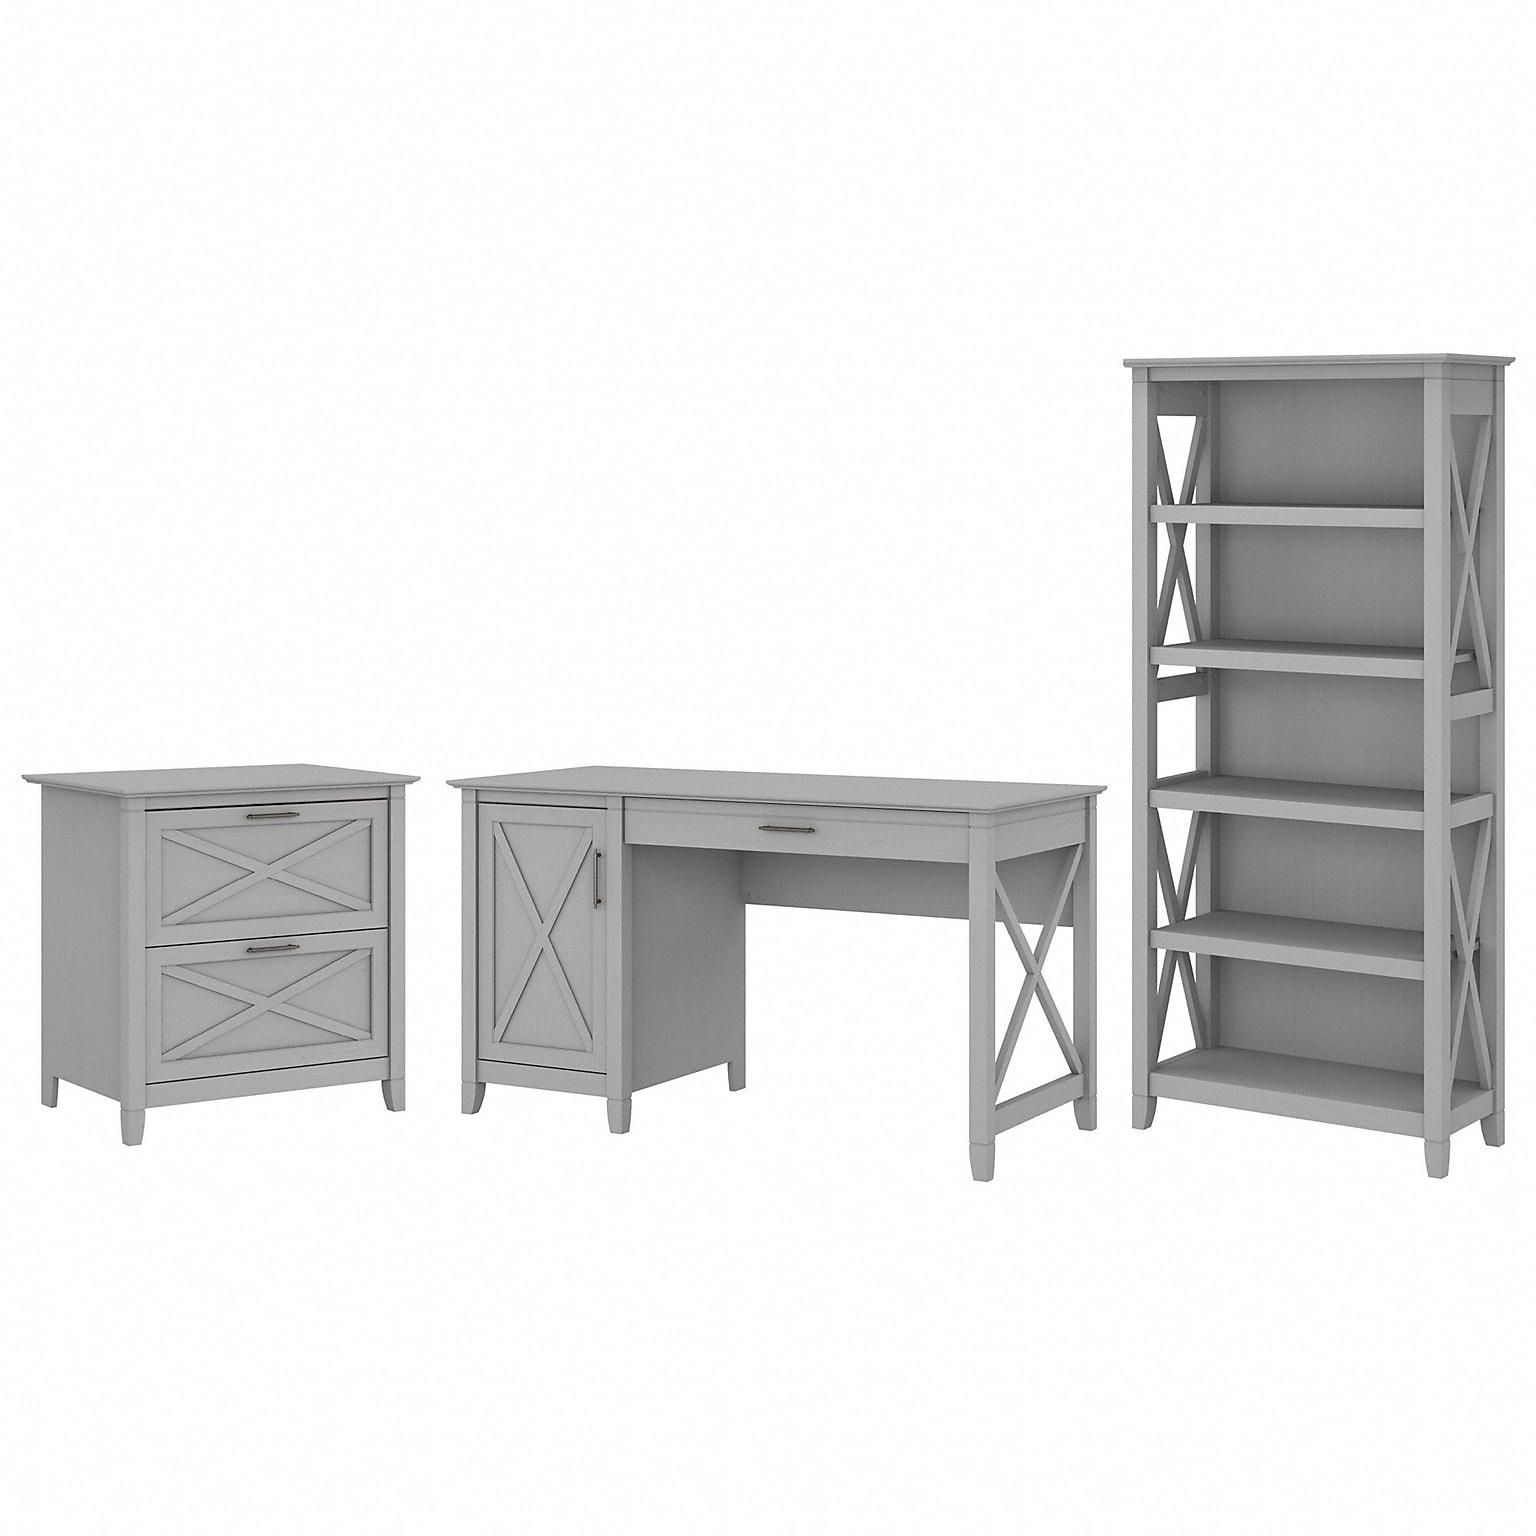 Bush Furniture Key West 54W Computer Desk with Lateral File Cabinet and Bookcase, Cape Cod Gray (KWS009CG)